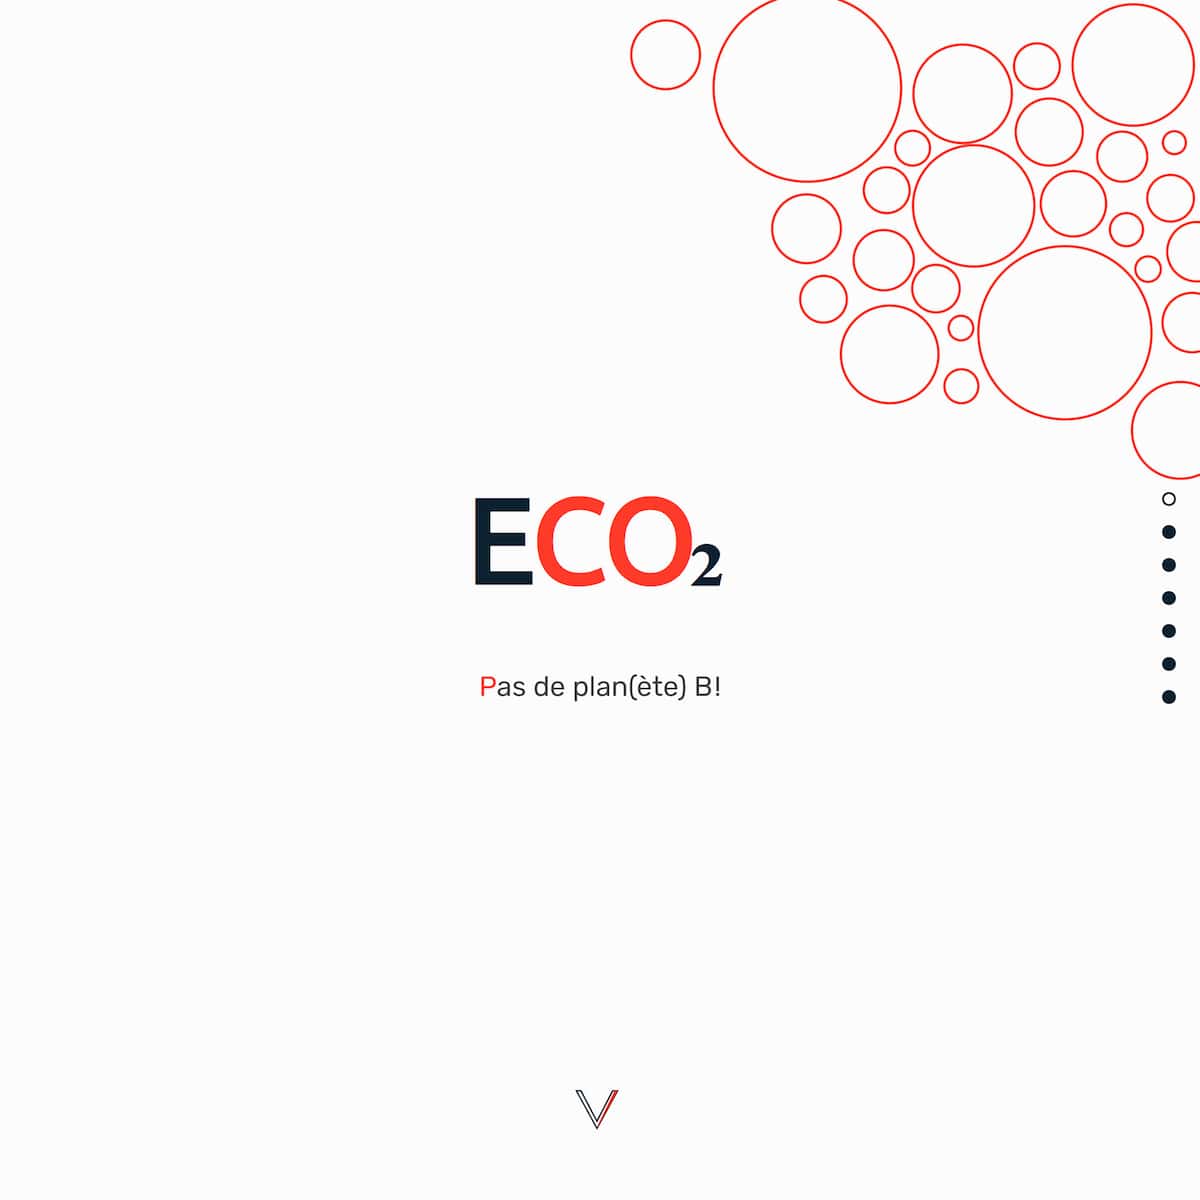 Projet Data-play ECO2